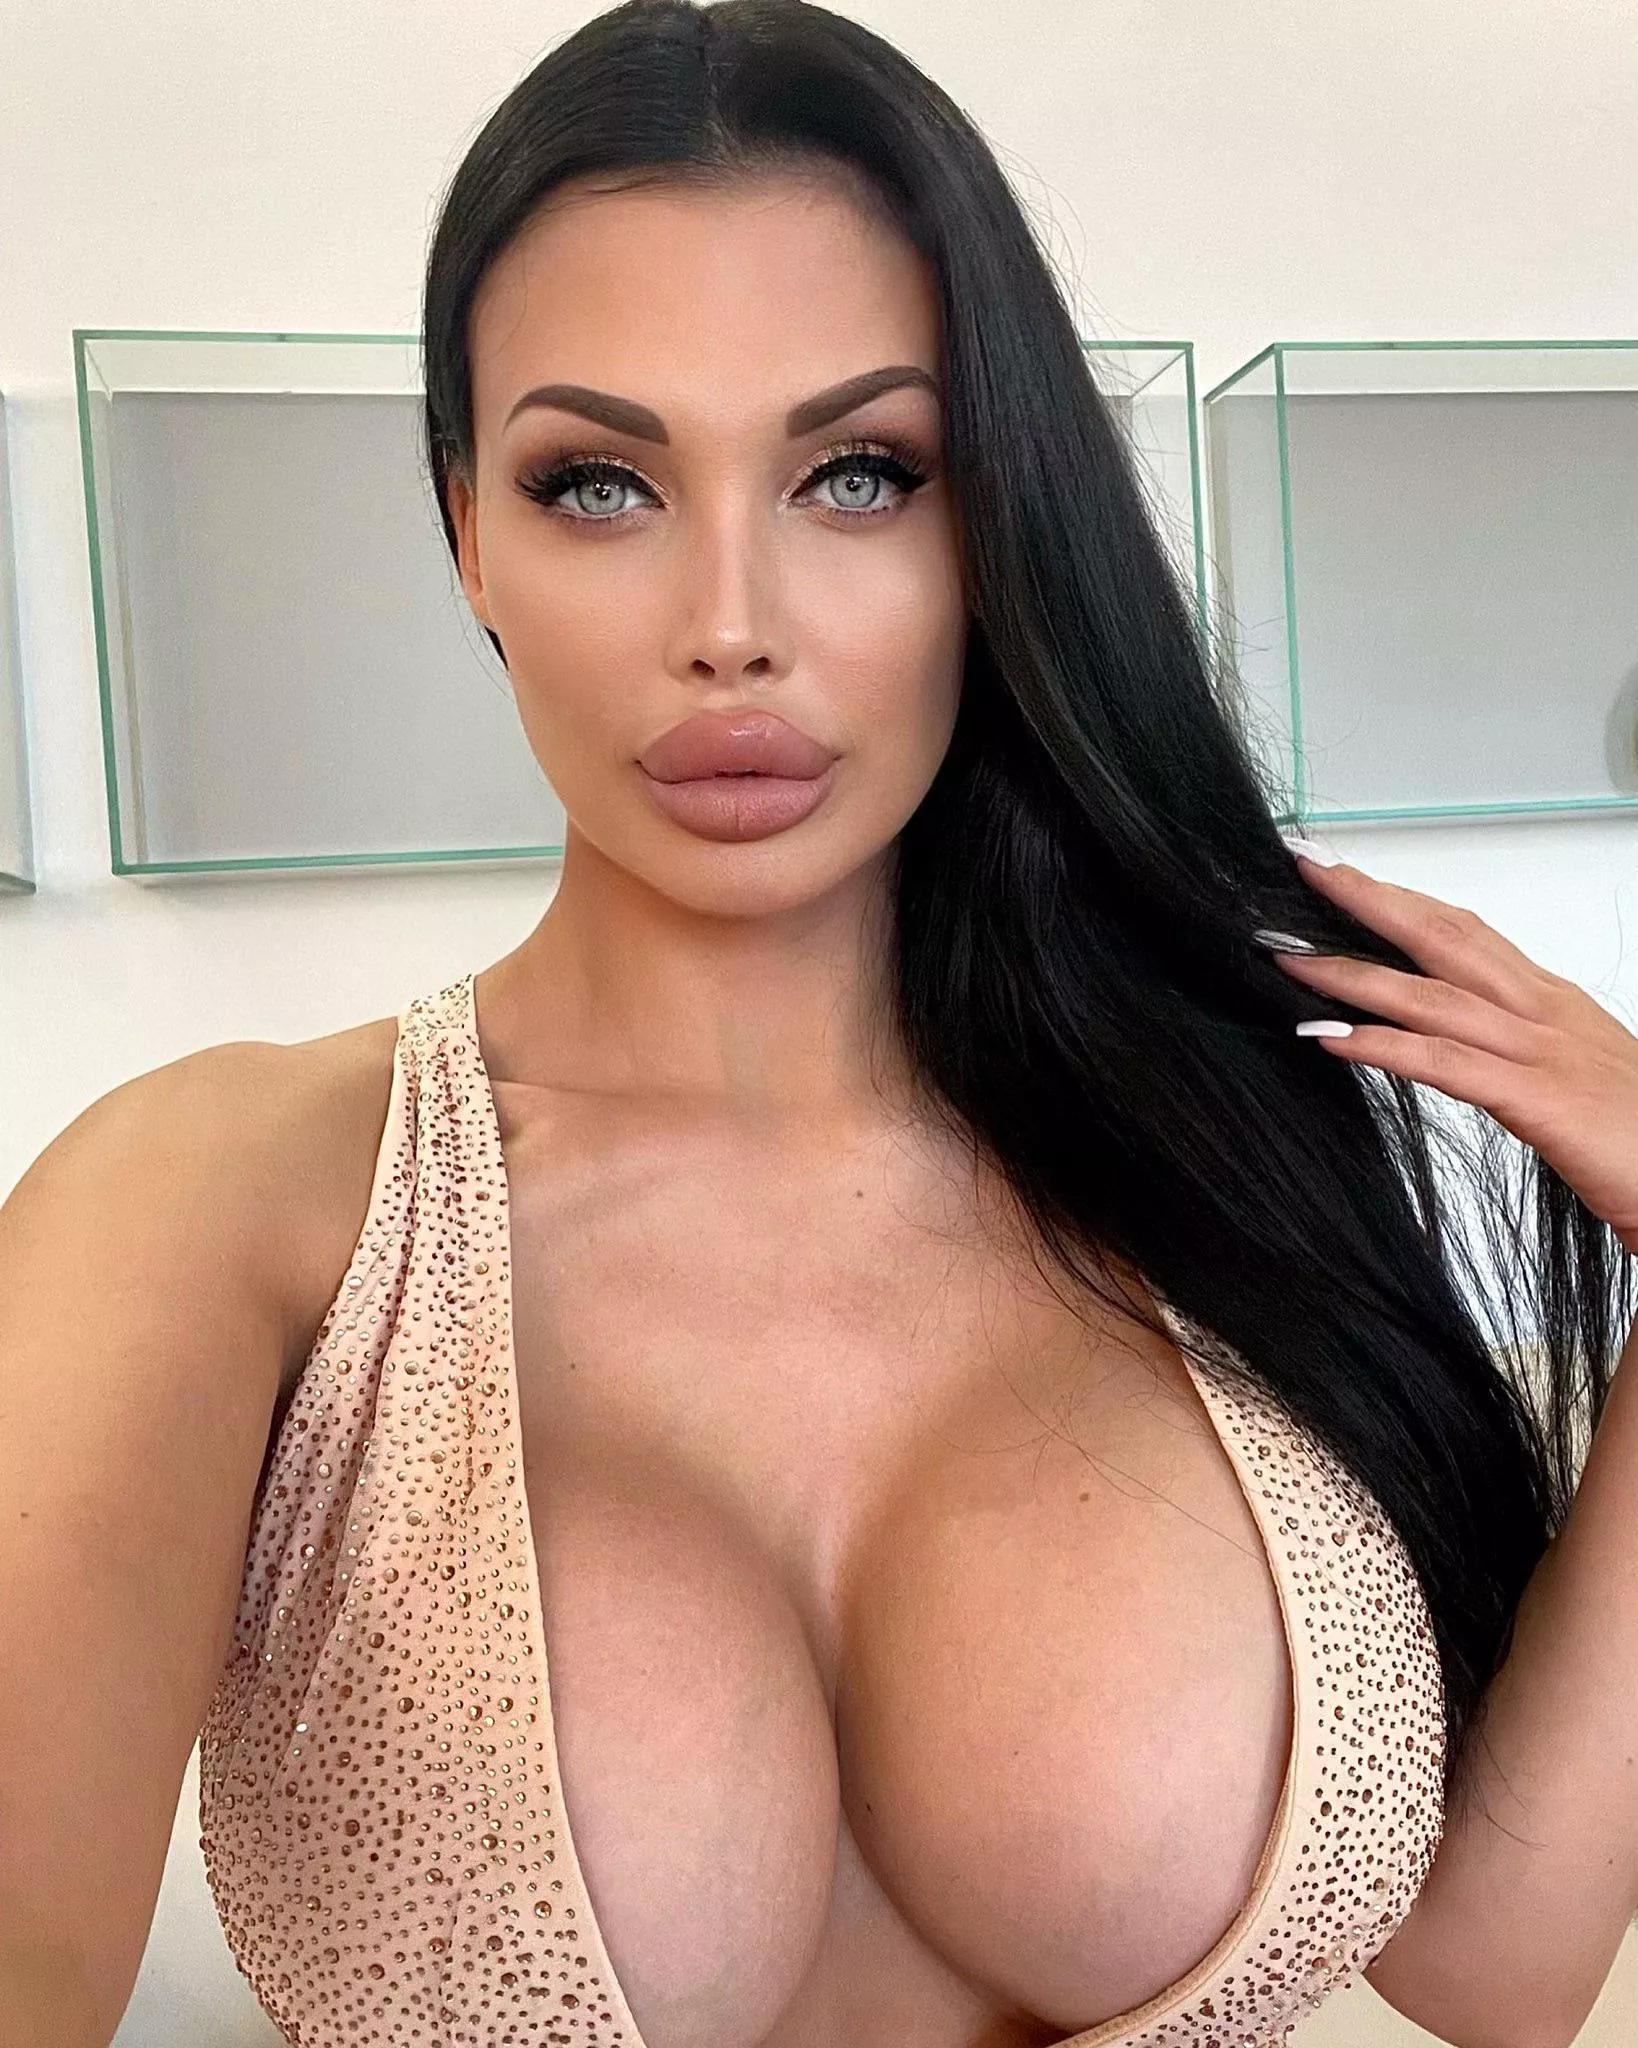 Aletta Ocean is the most beautiful woman in the world, who agrees? nudes bimbofetish NUDE-PICS